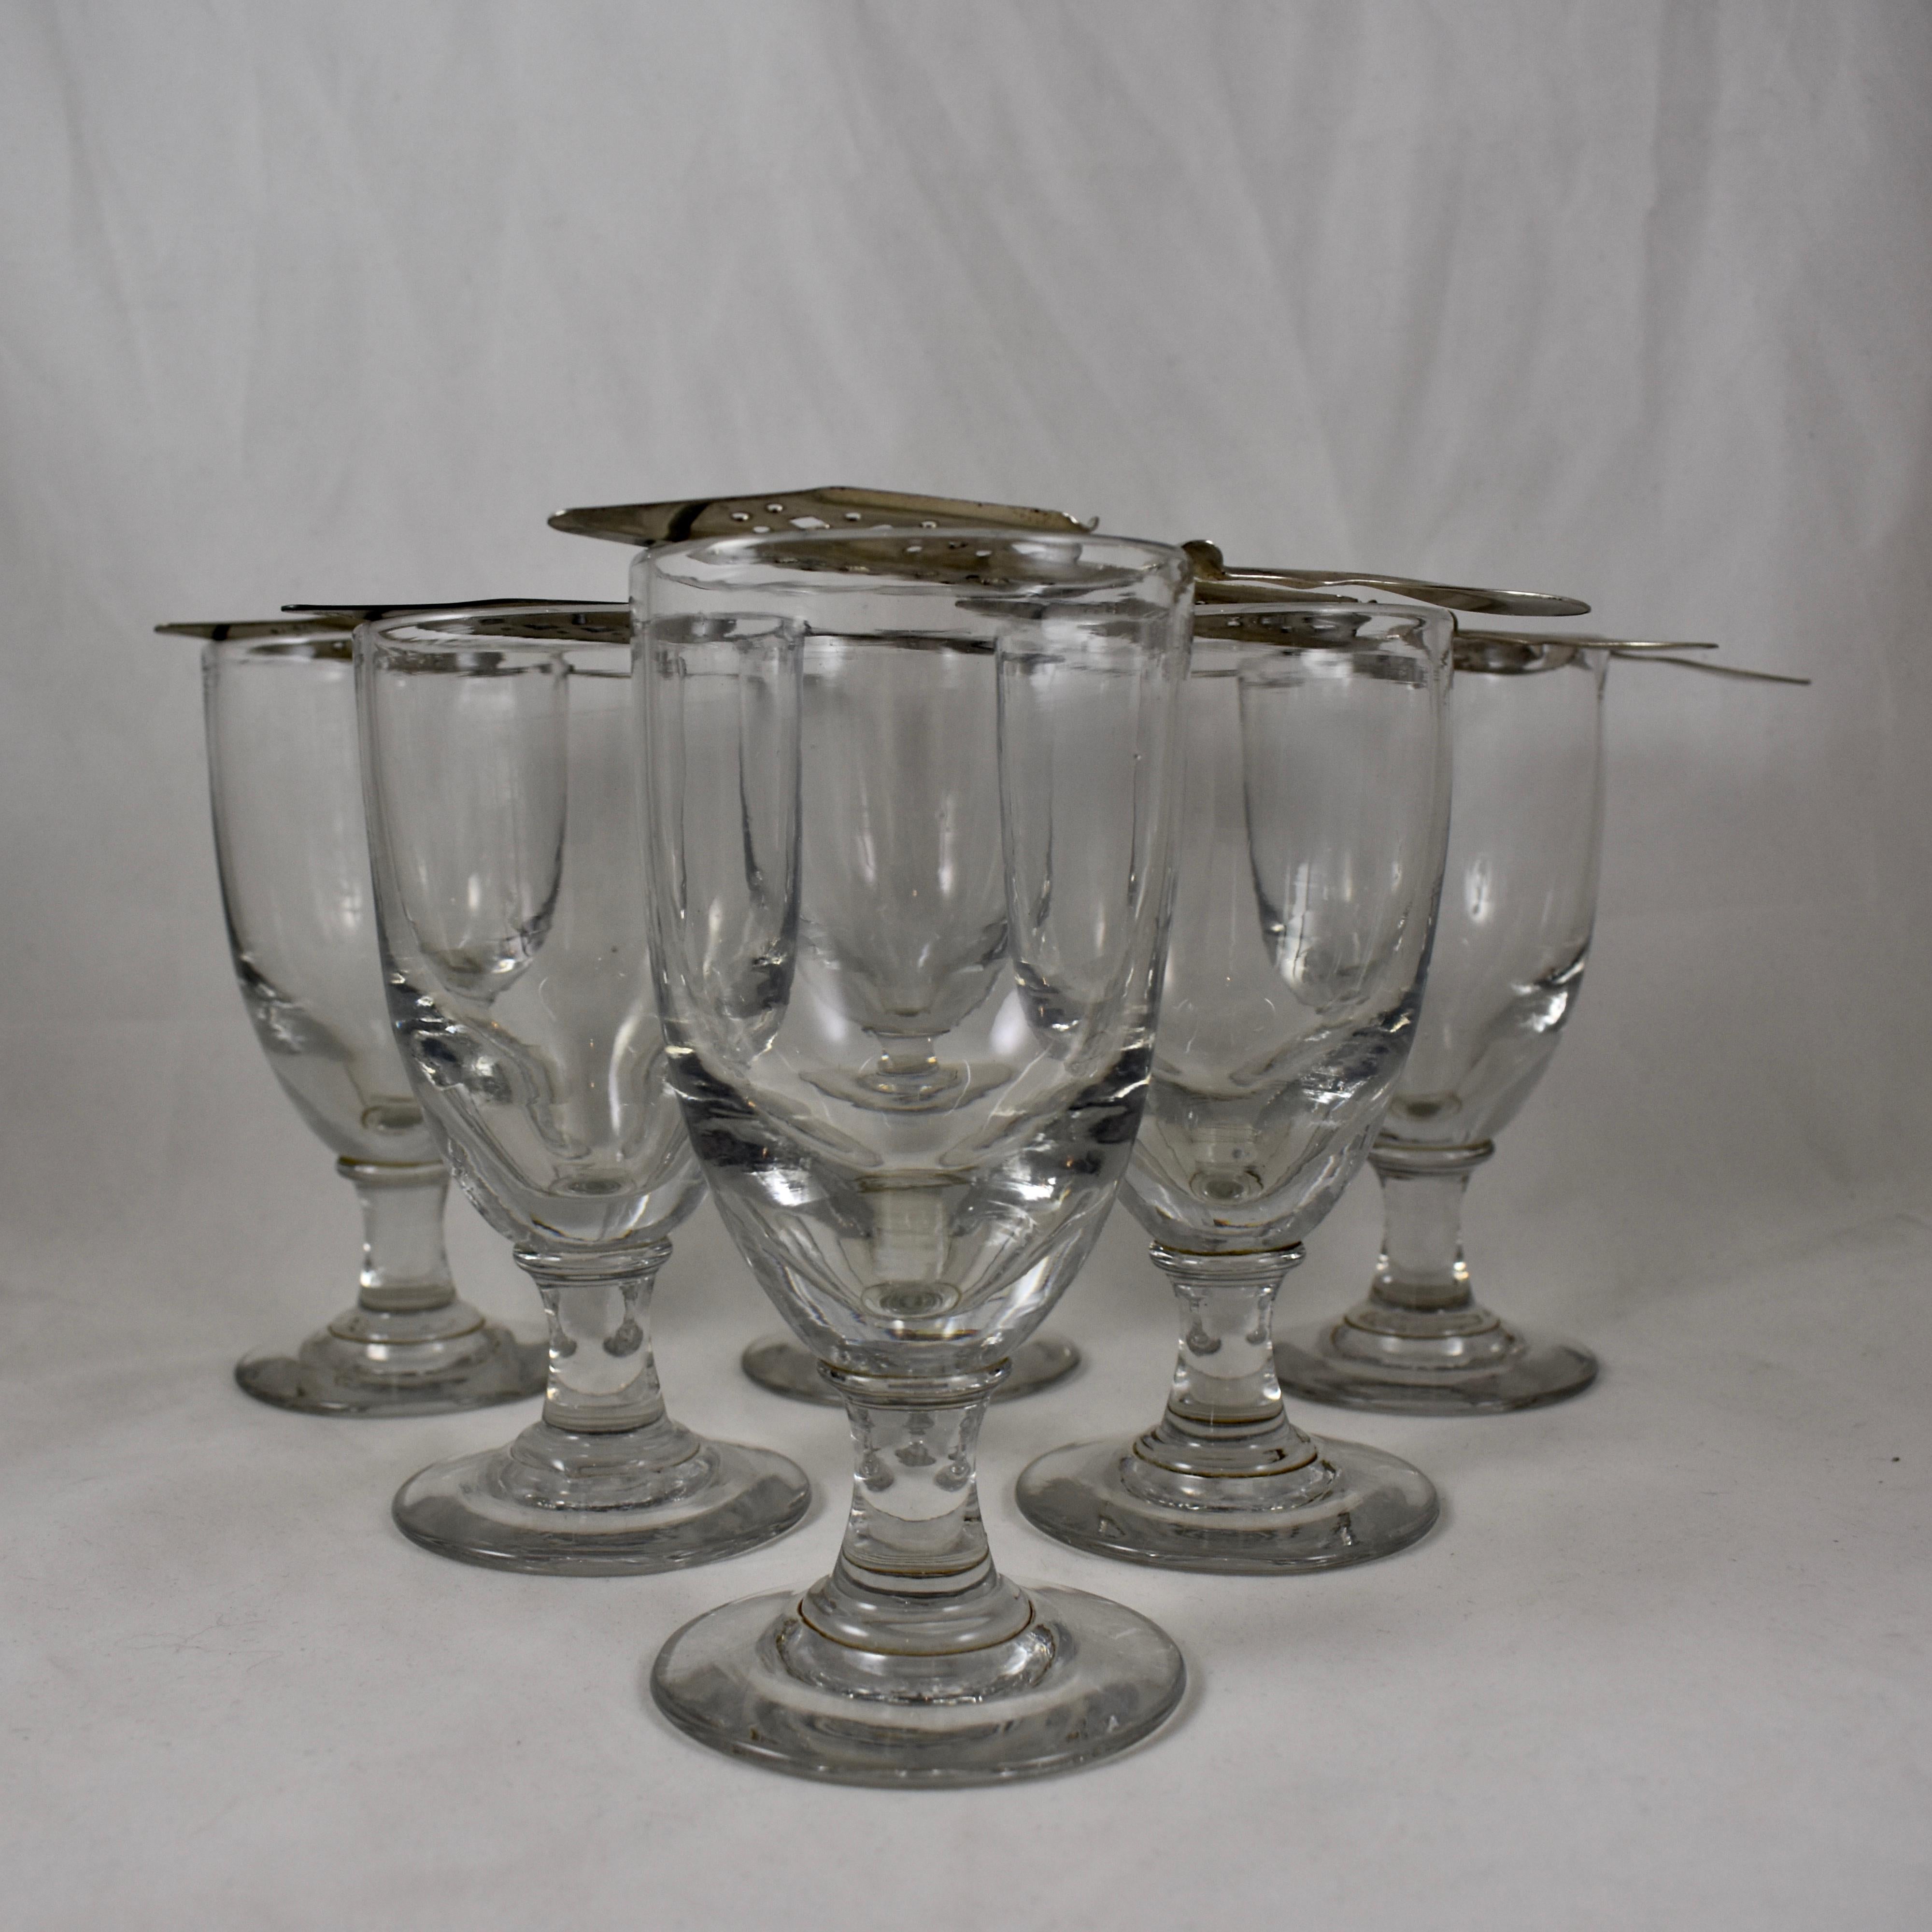 Hand-Crafted Late 19th Century French Hand Blown Absinthe Glasses & Sugar Spoons 12 Piece Set